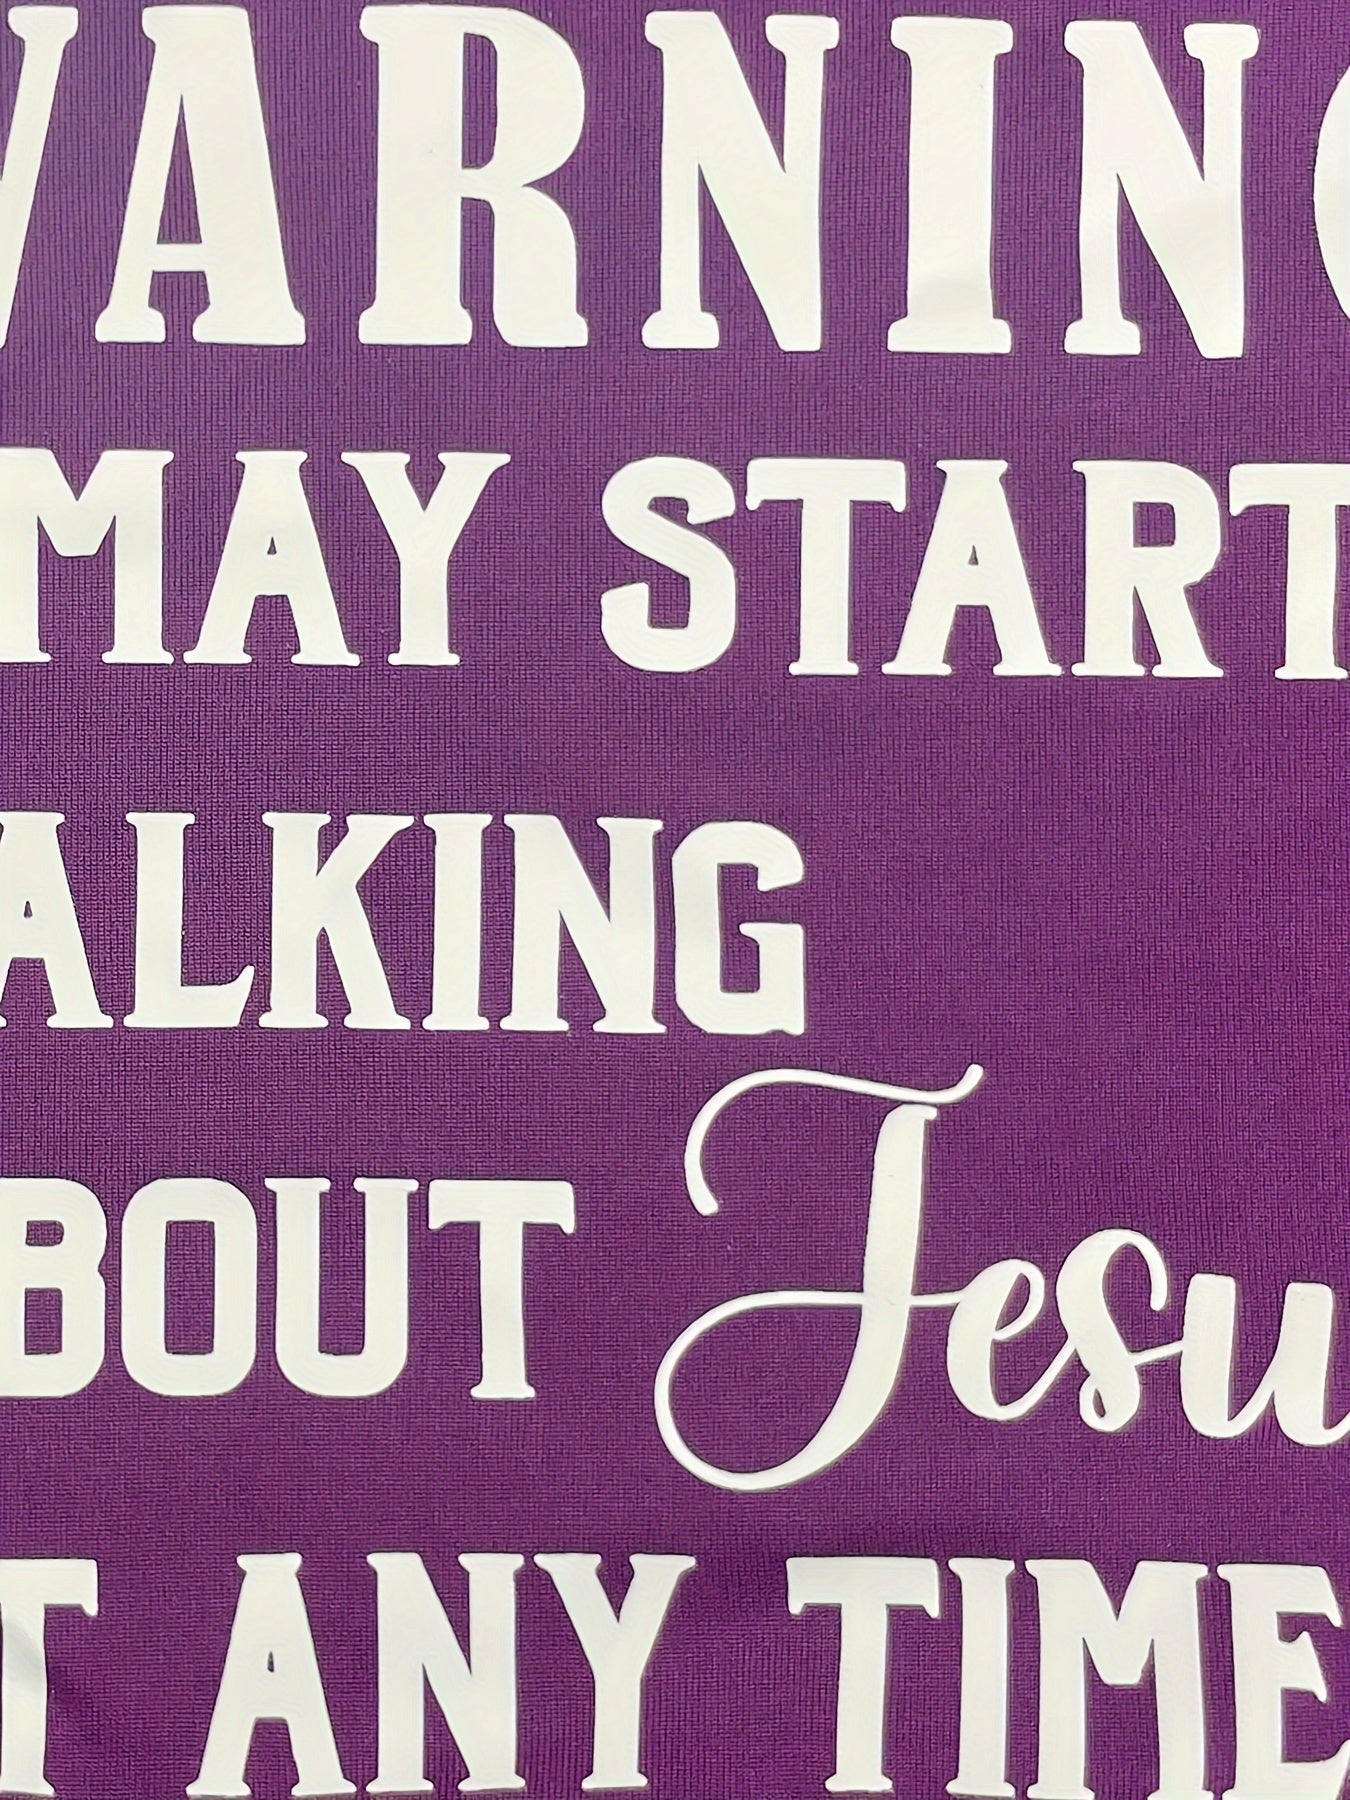 Warning I May Start Talking About Jesus At Any Time Women's Christian T-shirt claimedbygoddesigns